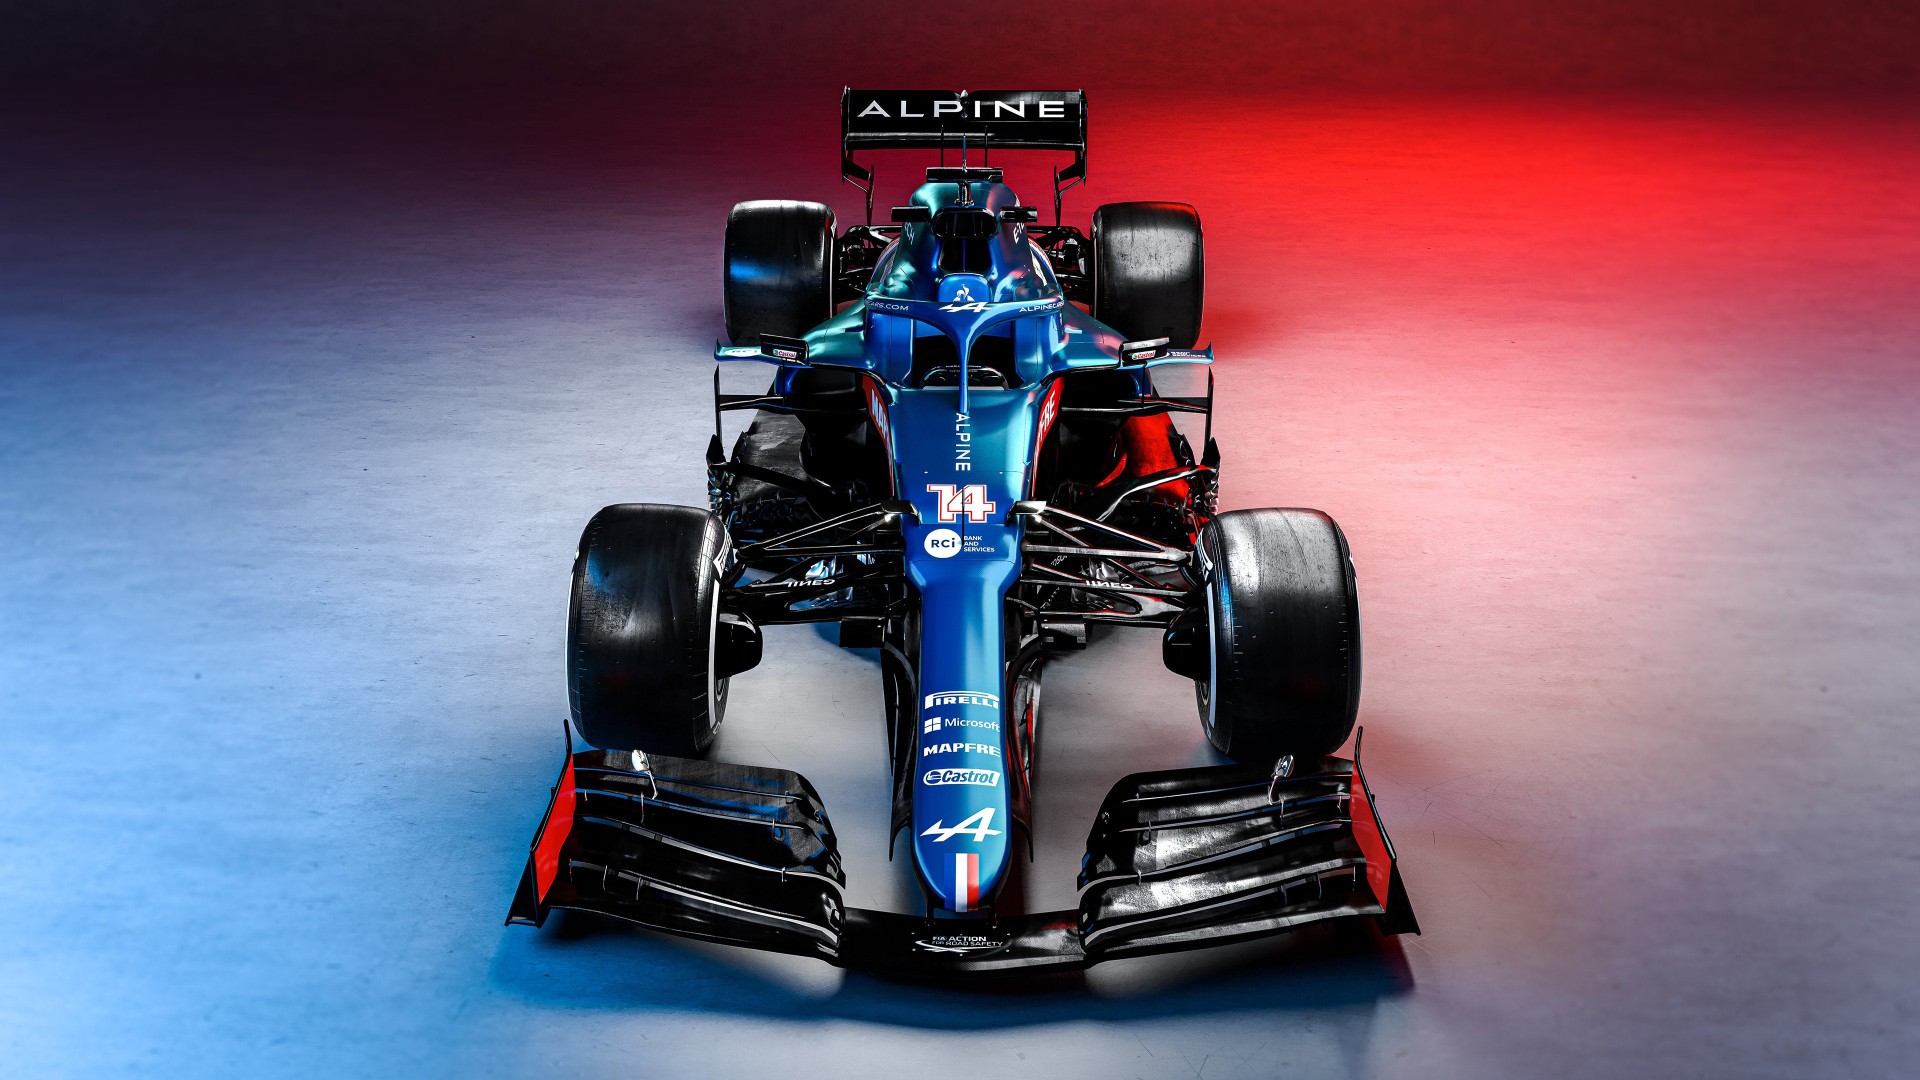 F1 Wallpaper  f1wallpaperzs  Instagram photos and videos